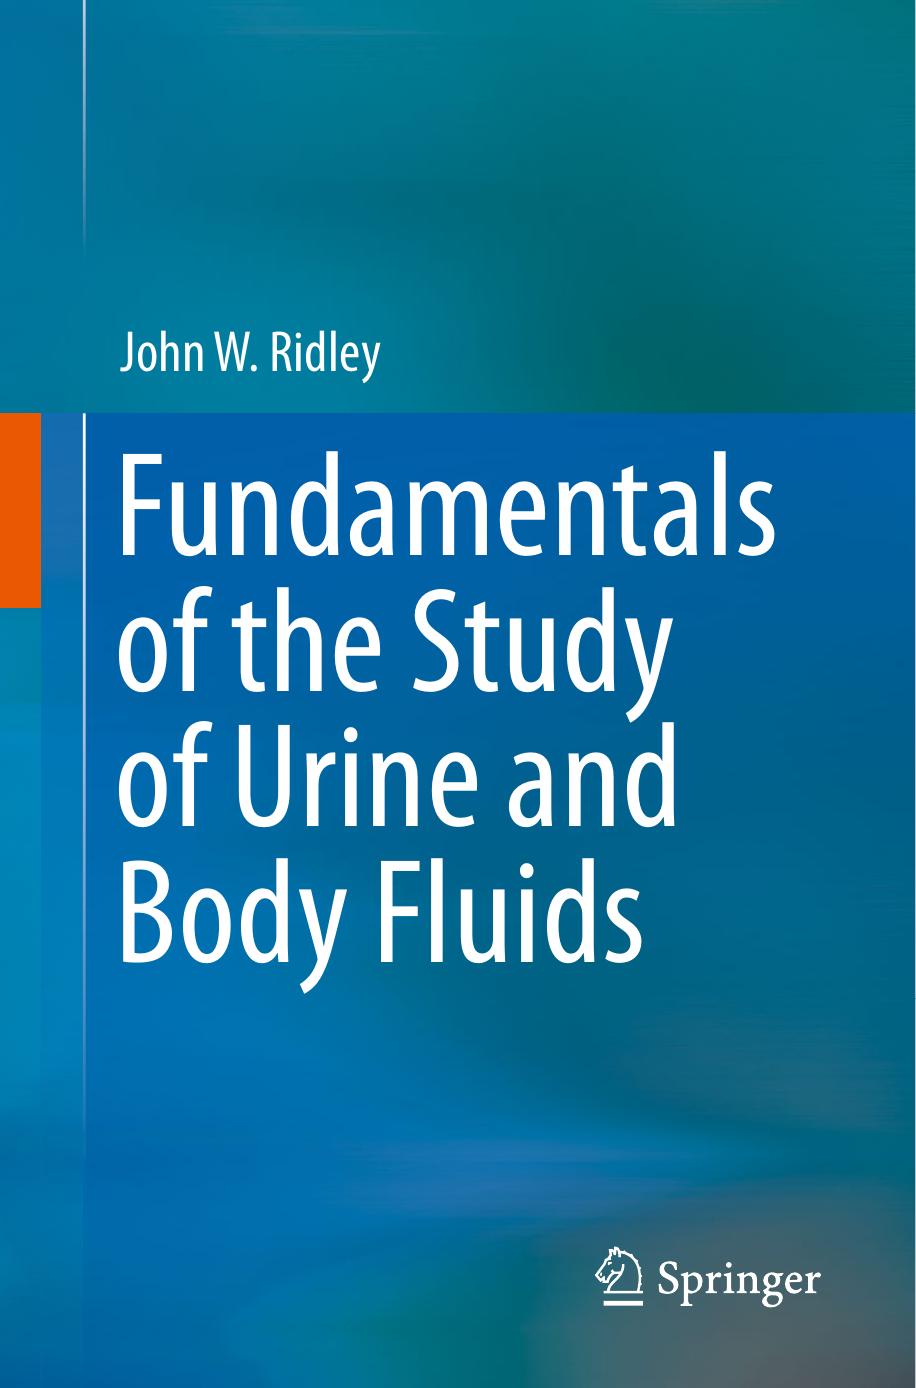 Fundamentals of the study of urine and body fluids 2018